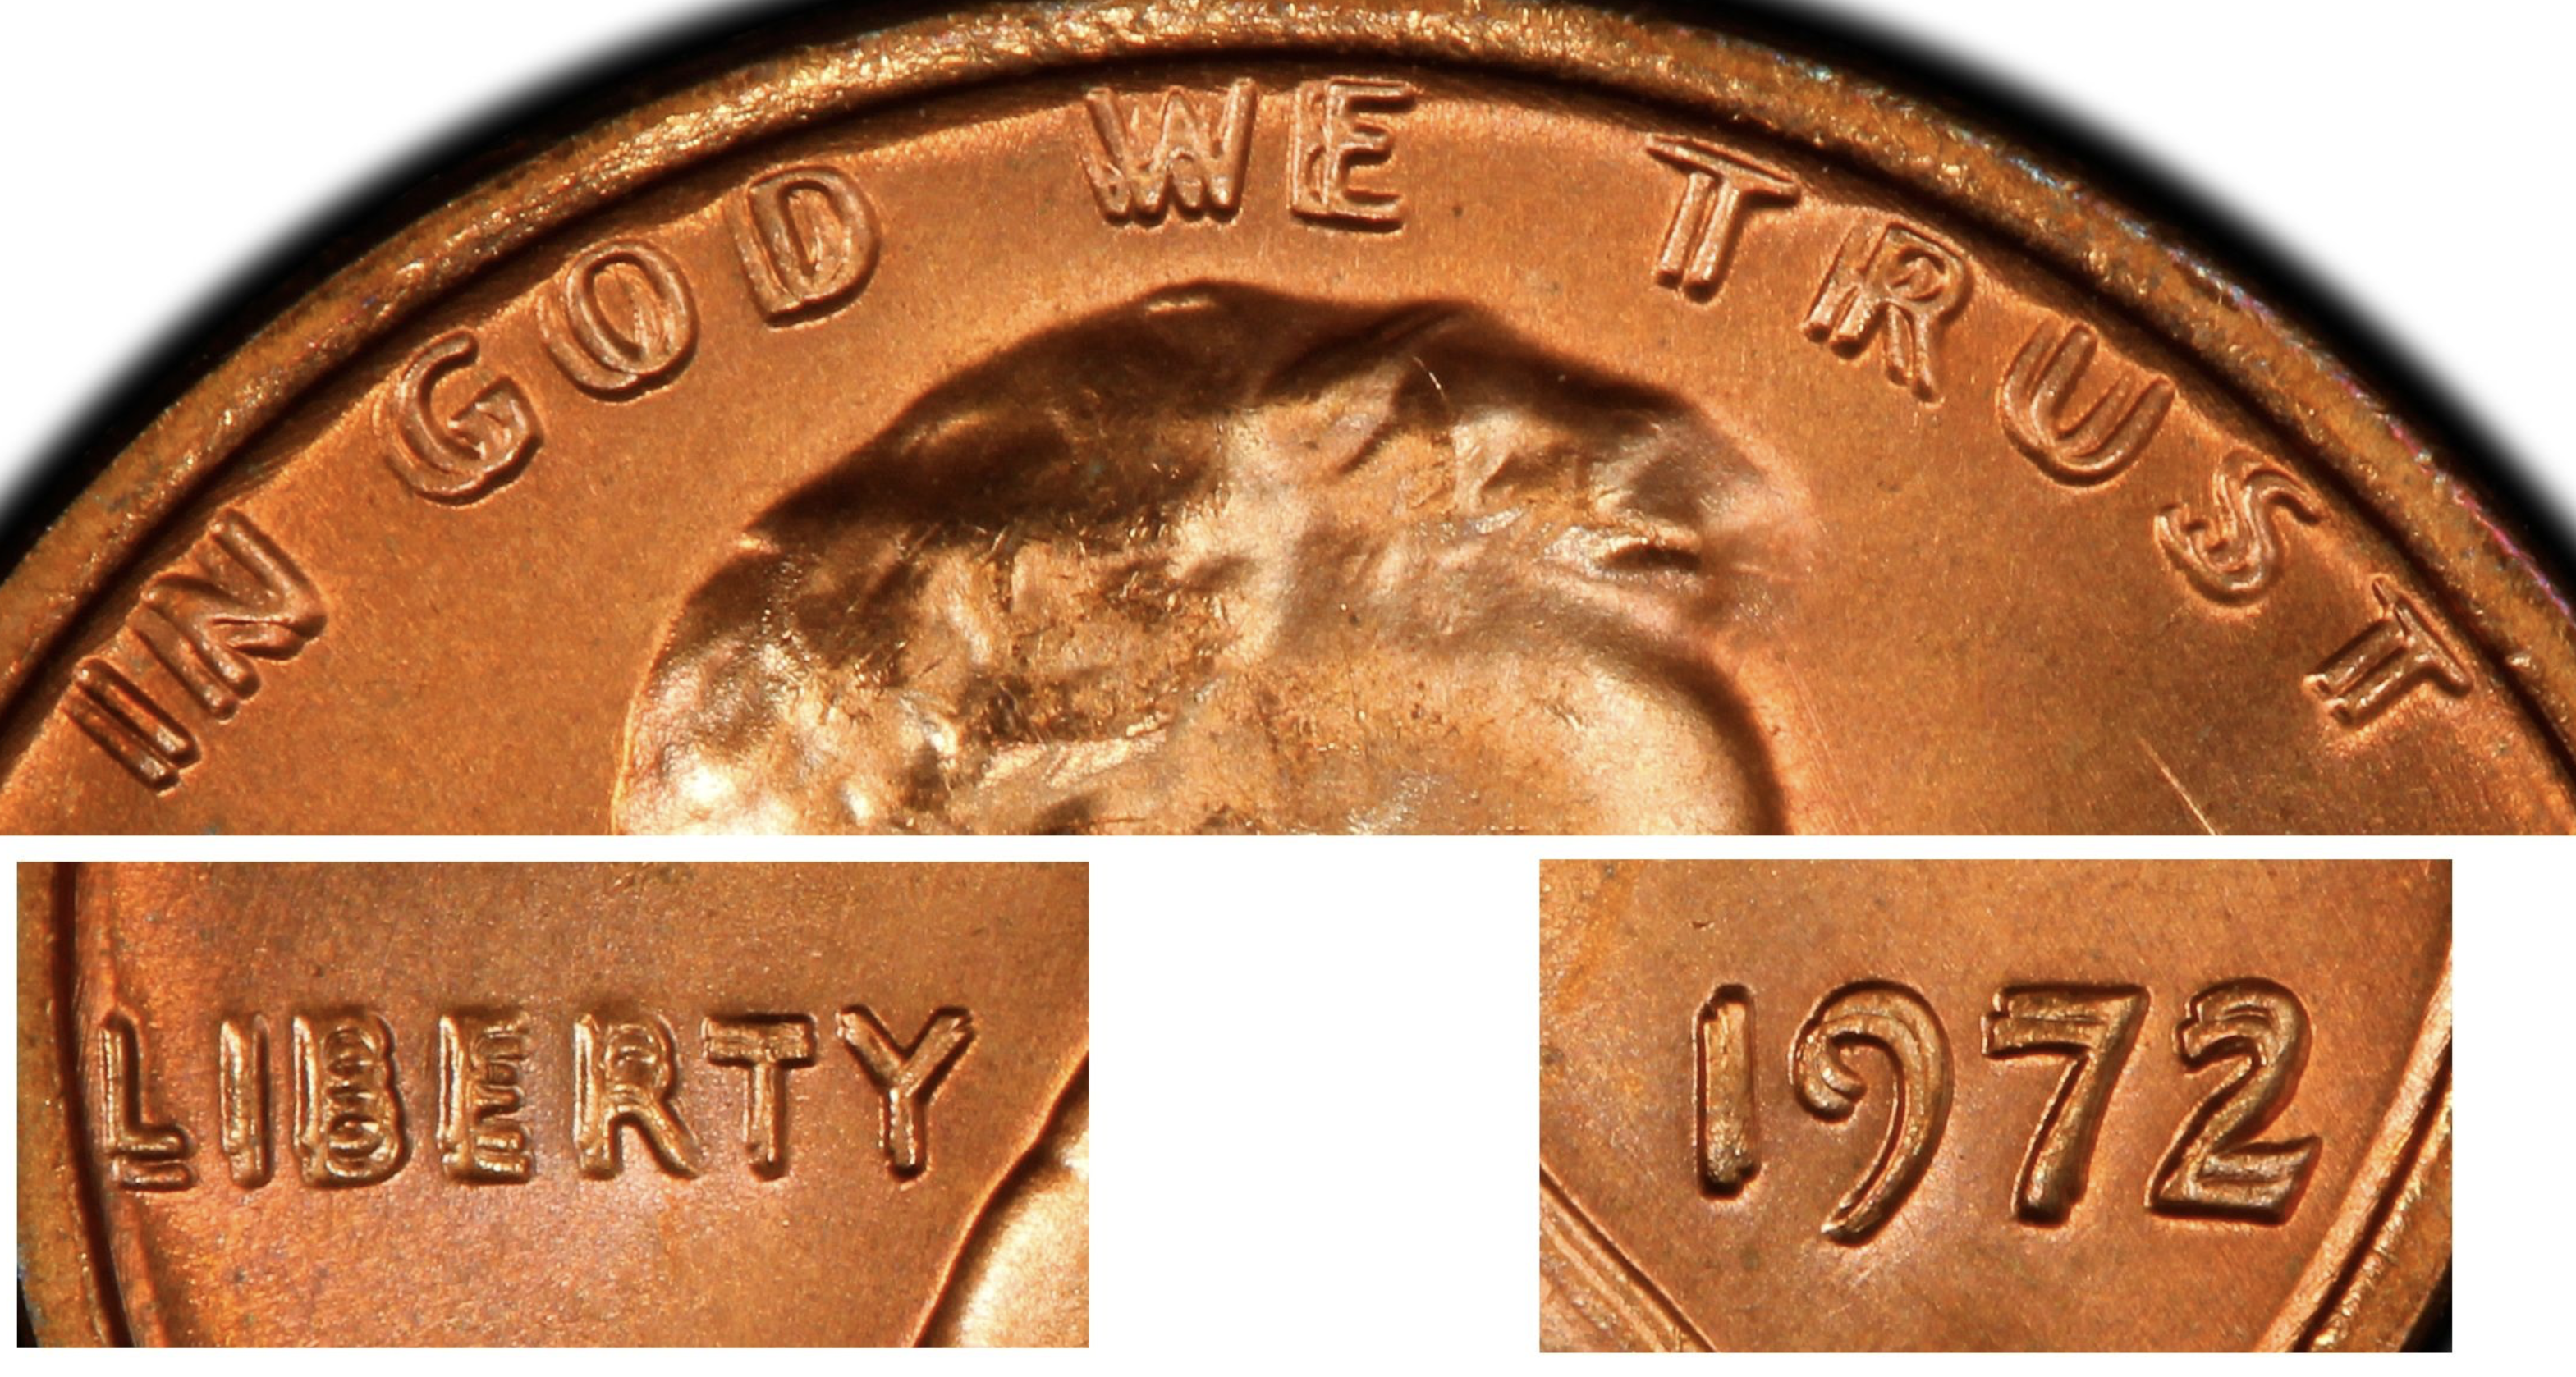 1972-P Doubled Die Obverse Lincoln cent value